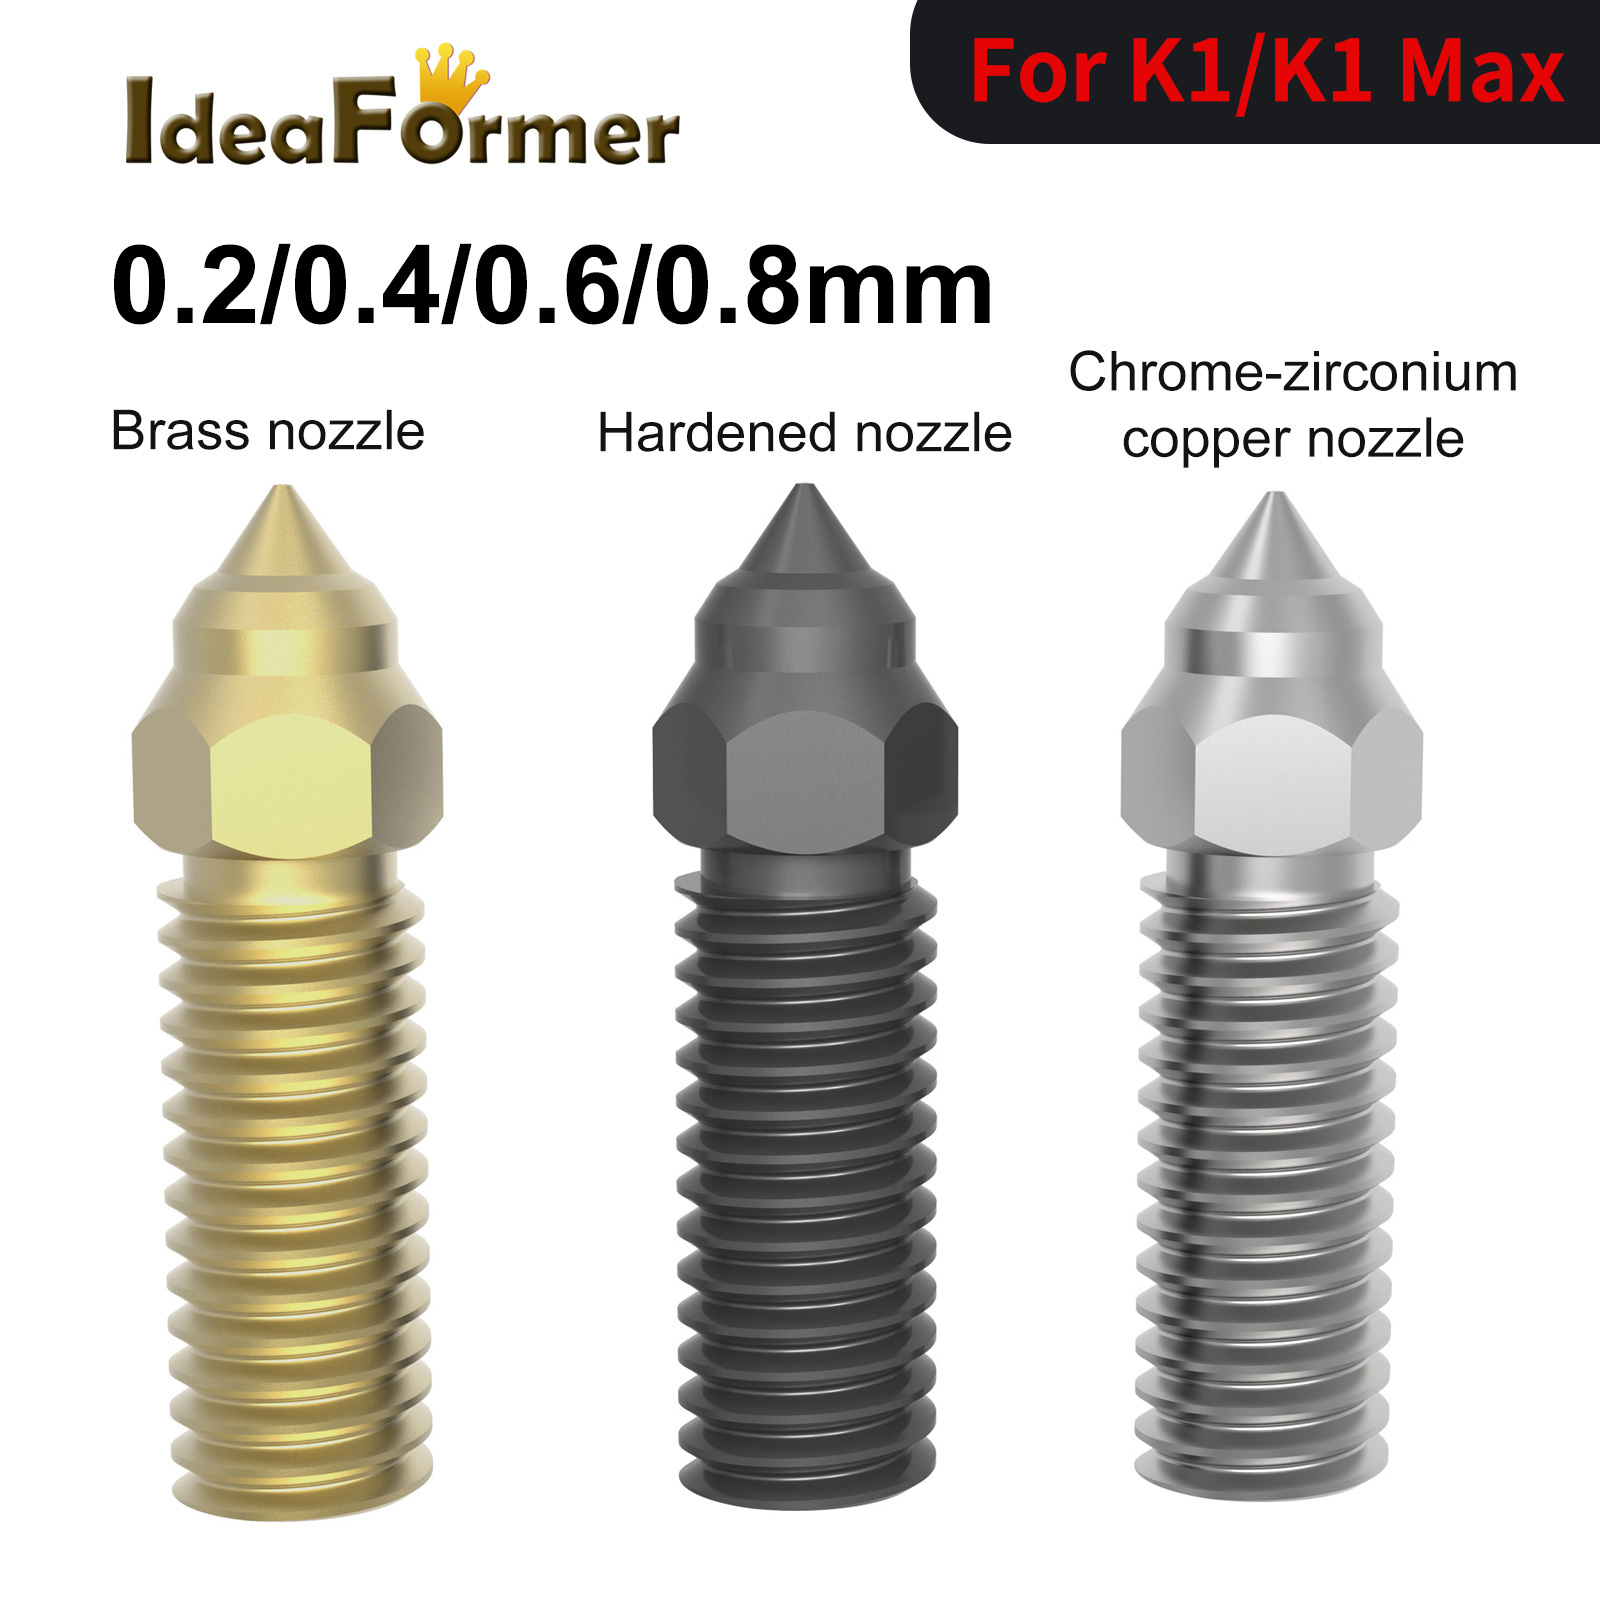 IdeaFormer K1 Nozzle Kit, 2PCS 3D Printer Hardened Steel/copper alloy nozzle/Brass Nozzles 0.2/0.4/0.6/0.8mm, High Speed Printing and High Flow Extruder Nozzles for Creality K1, K1 Max, CR-M4 3D Printer